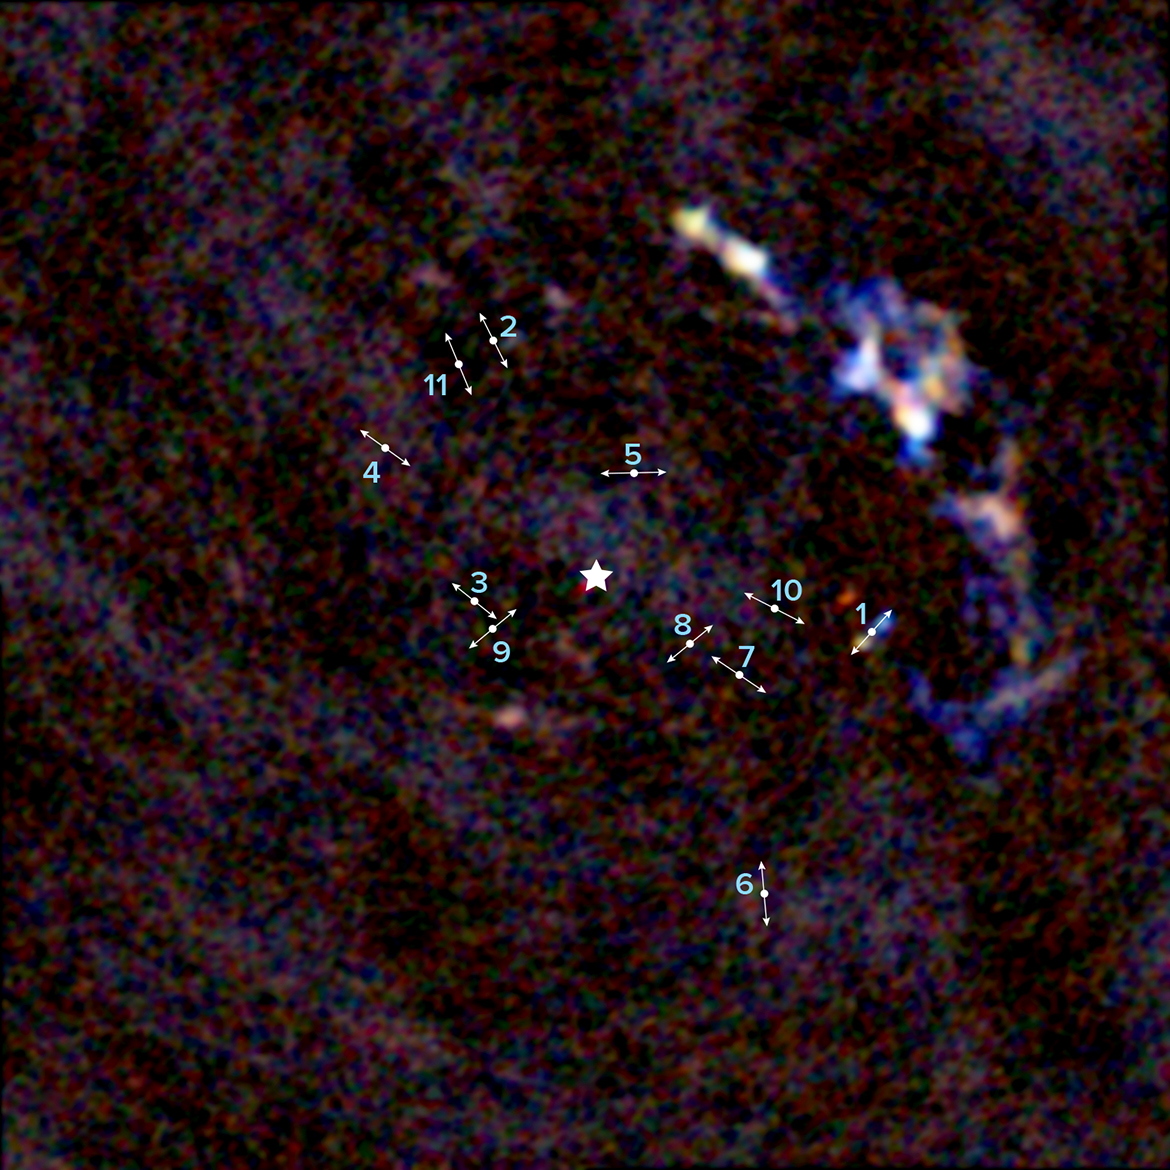 <p>An ALMA image of the center of the Milky Way galaxy revealing 11 young protostars within about 3 light-years of our galaxy's supermassive black hole. The lines indicate the direction of the bipolar lobes created by high-velocity jets from the protostars. The star indicates the location of Sagittarius A*, the 4 million solar mass supermassive black hole at the center of our galaxy.<br />
Credit: ALMA (ESO/NAOJ/NRAO), Yusef-Zadeh et al.; B. Saxton (NRAO/AUI/NSF)</p>
